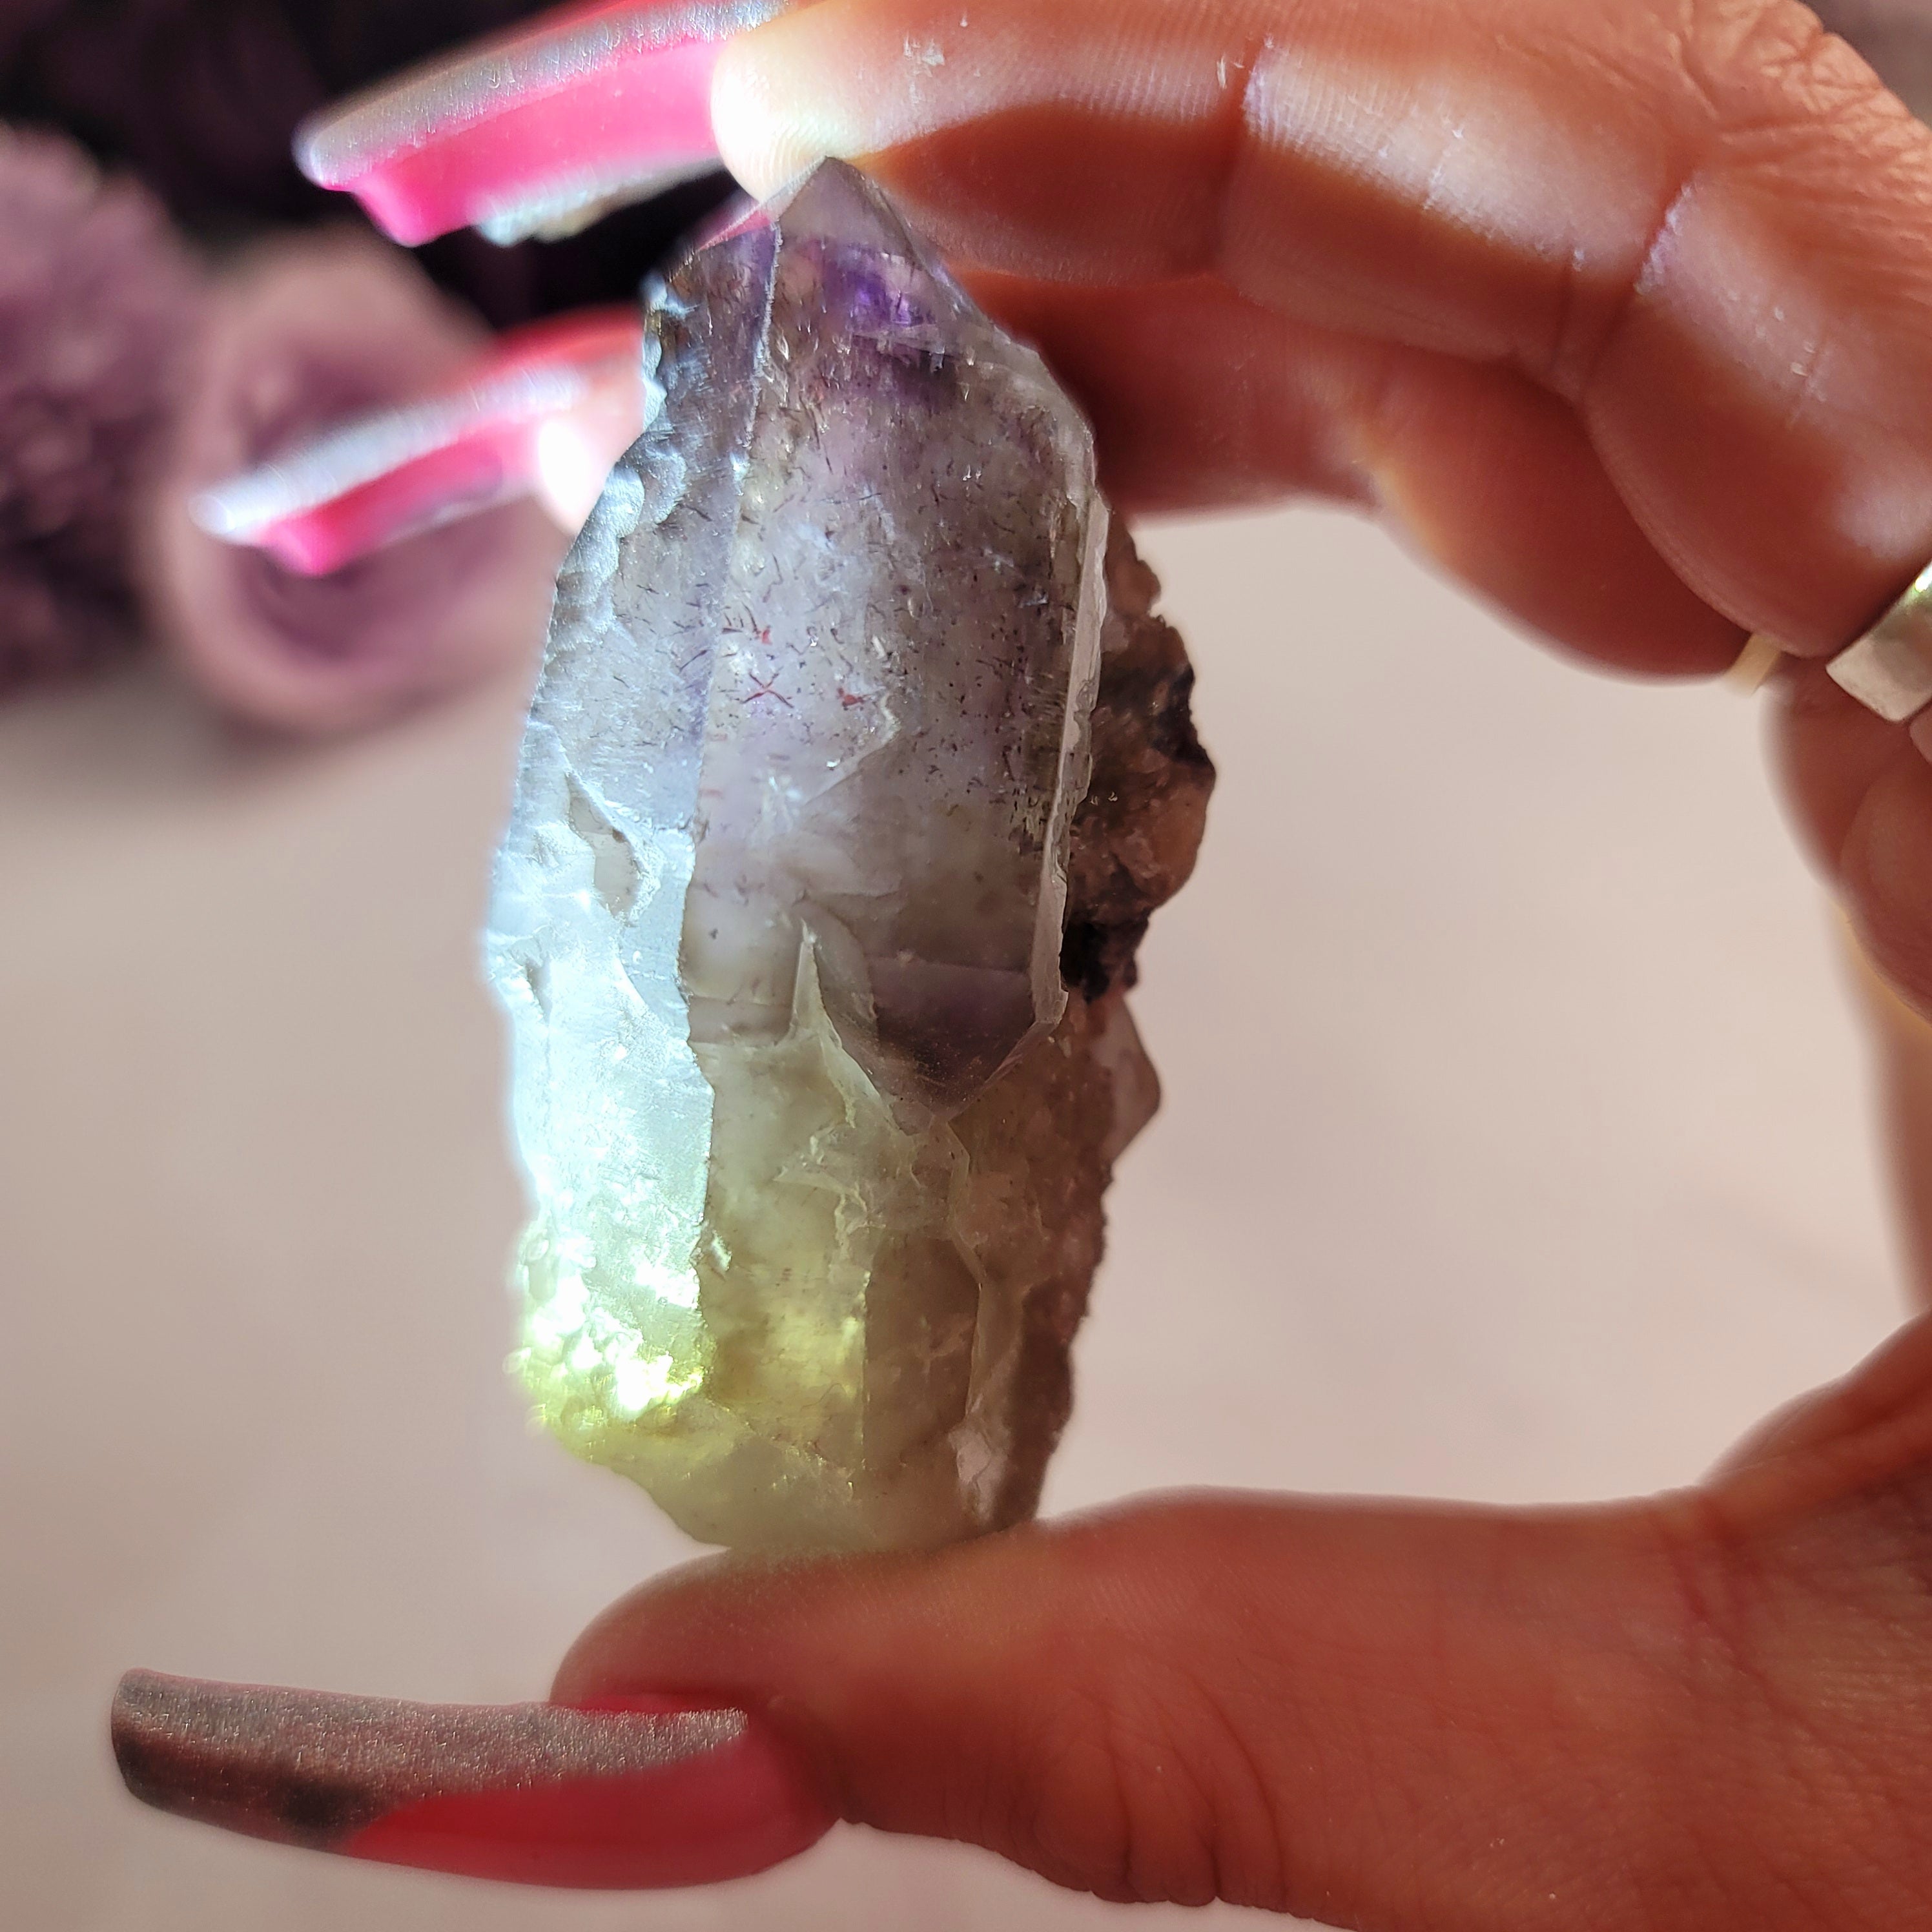 Smokey Amethyst Scepter with Lepidocrocite Inclusions for Intuition, Connection with the Divine and Past Life Recall